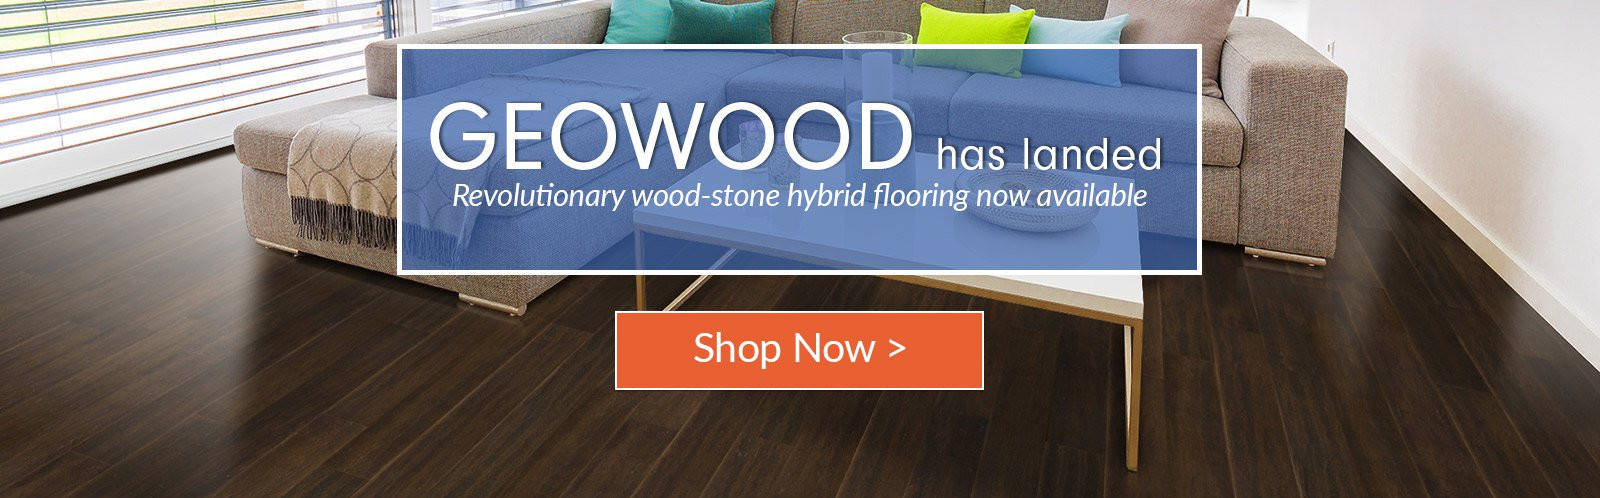 17 Spectacular Hardwood Floor Repair Dallas Tx 2024 free download hardwood floor repair dallas tx of green building construction materials and home decor cali bamboo pertaining to geowood launch homepage slider